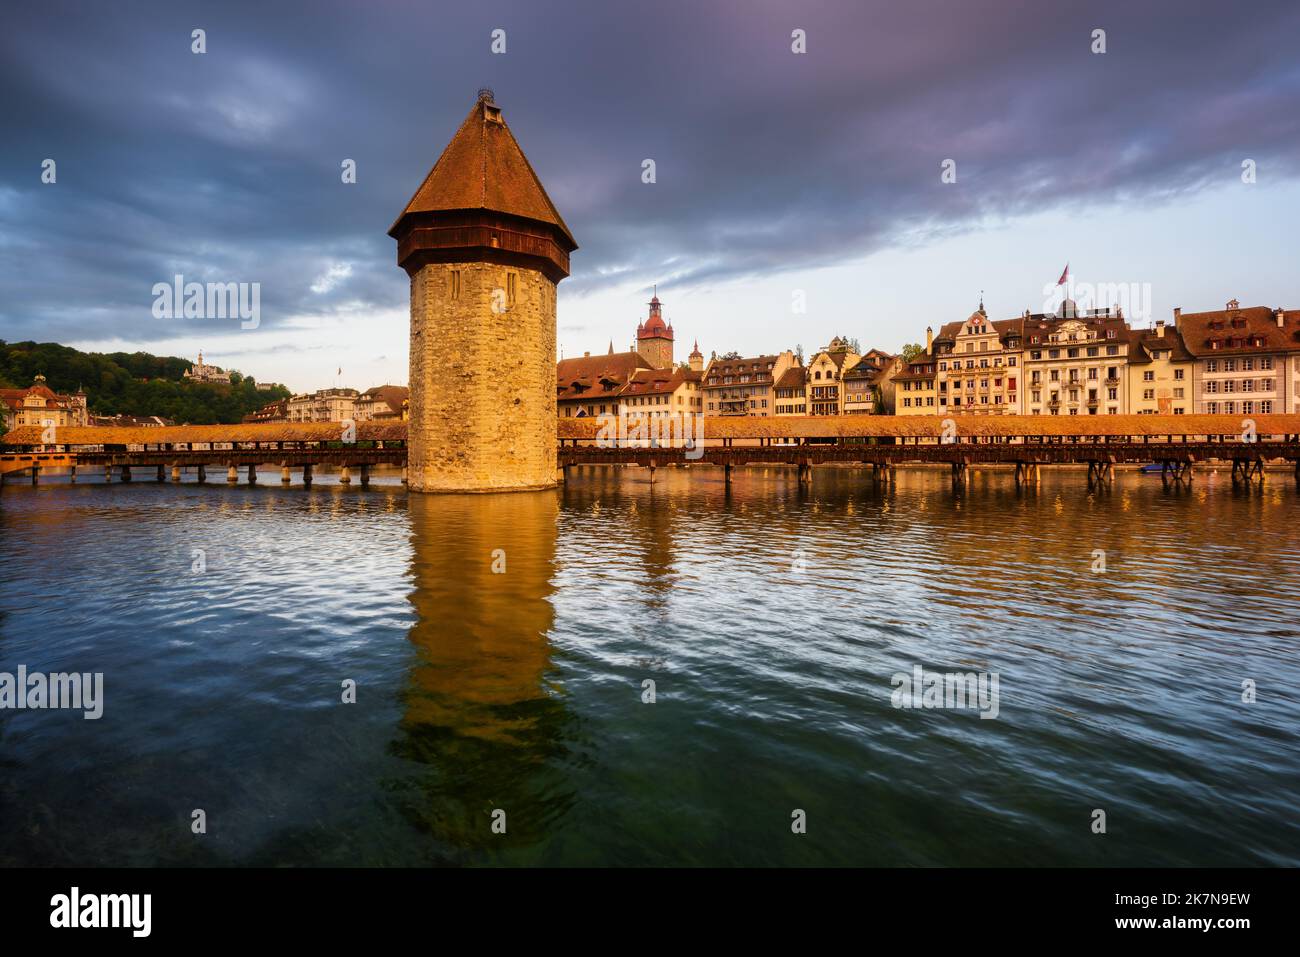 Old town of Lucerne city, Switzerland, view of the Water tower, wooden Chapel bridge and historical houses reflecting in Reuss river in dramatical sun Stock Photo